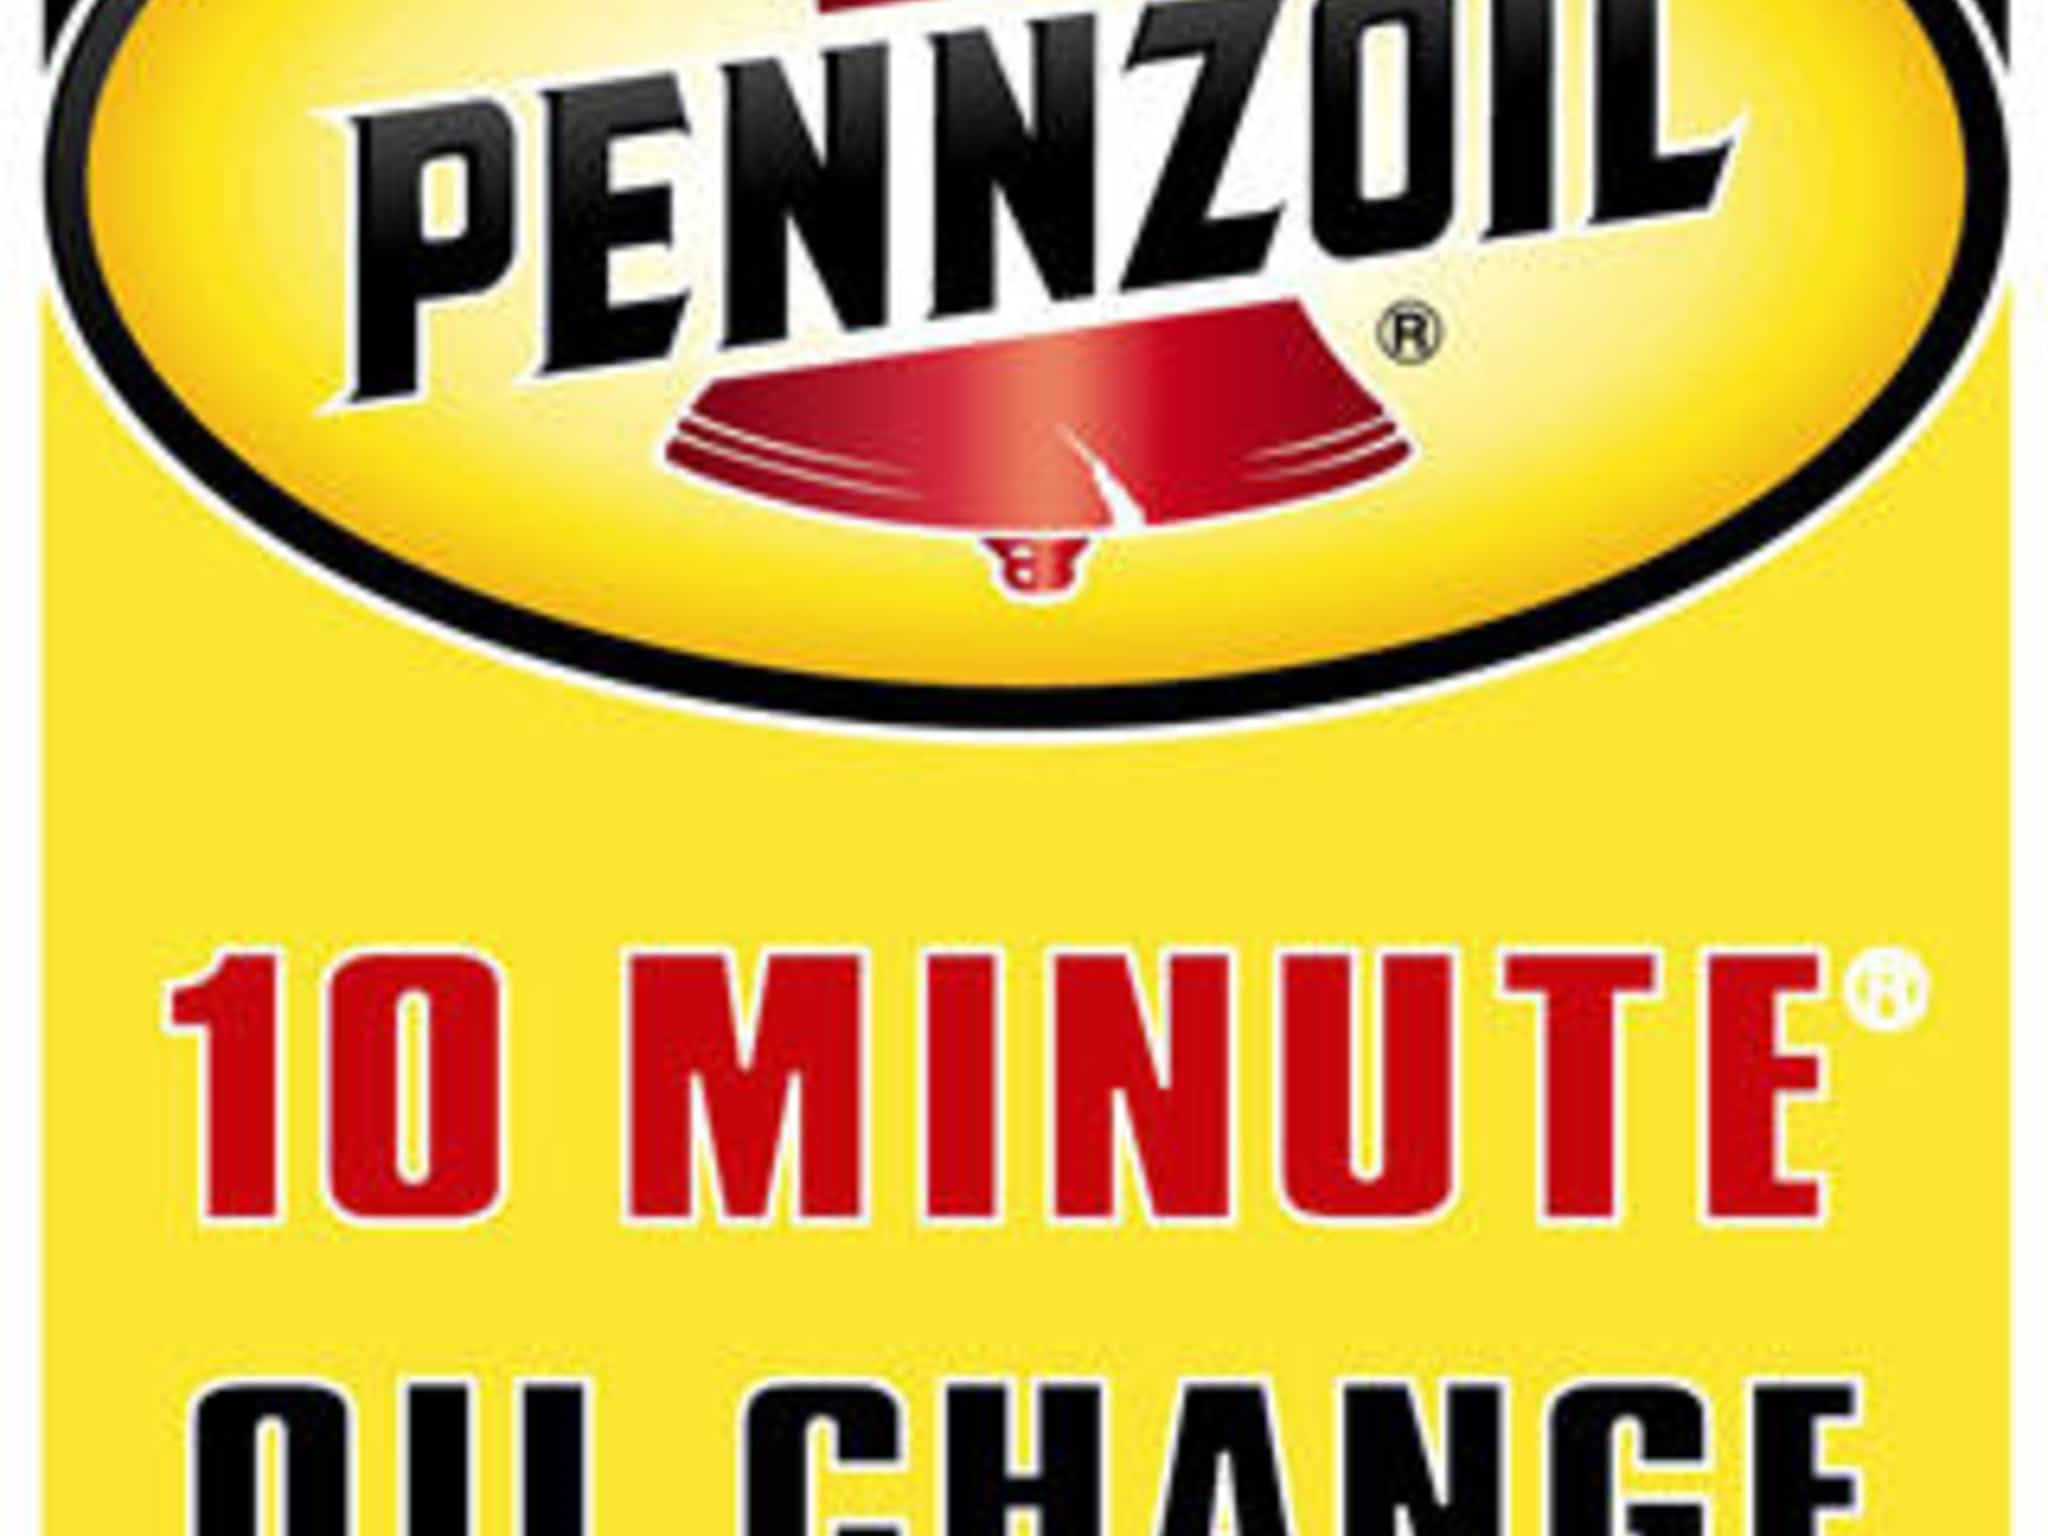 five minute oil change prices